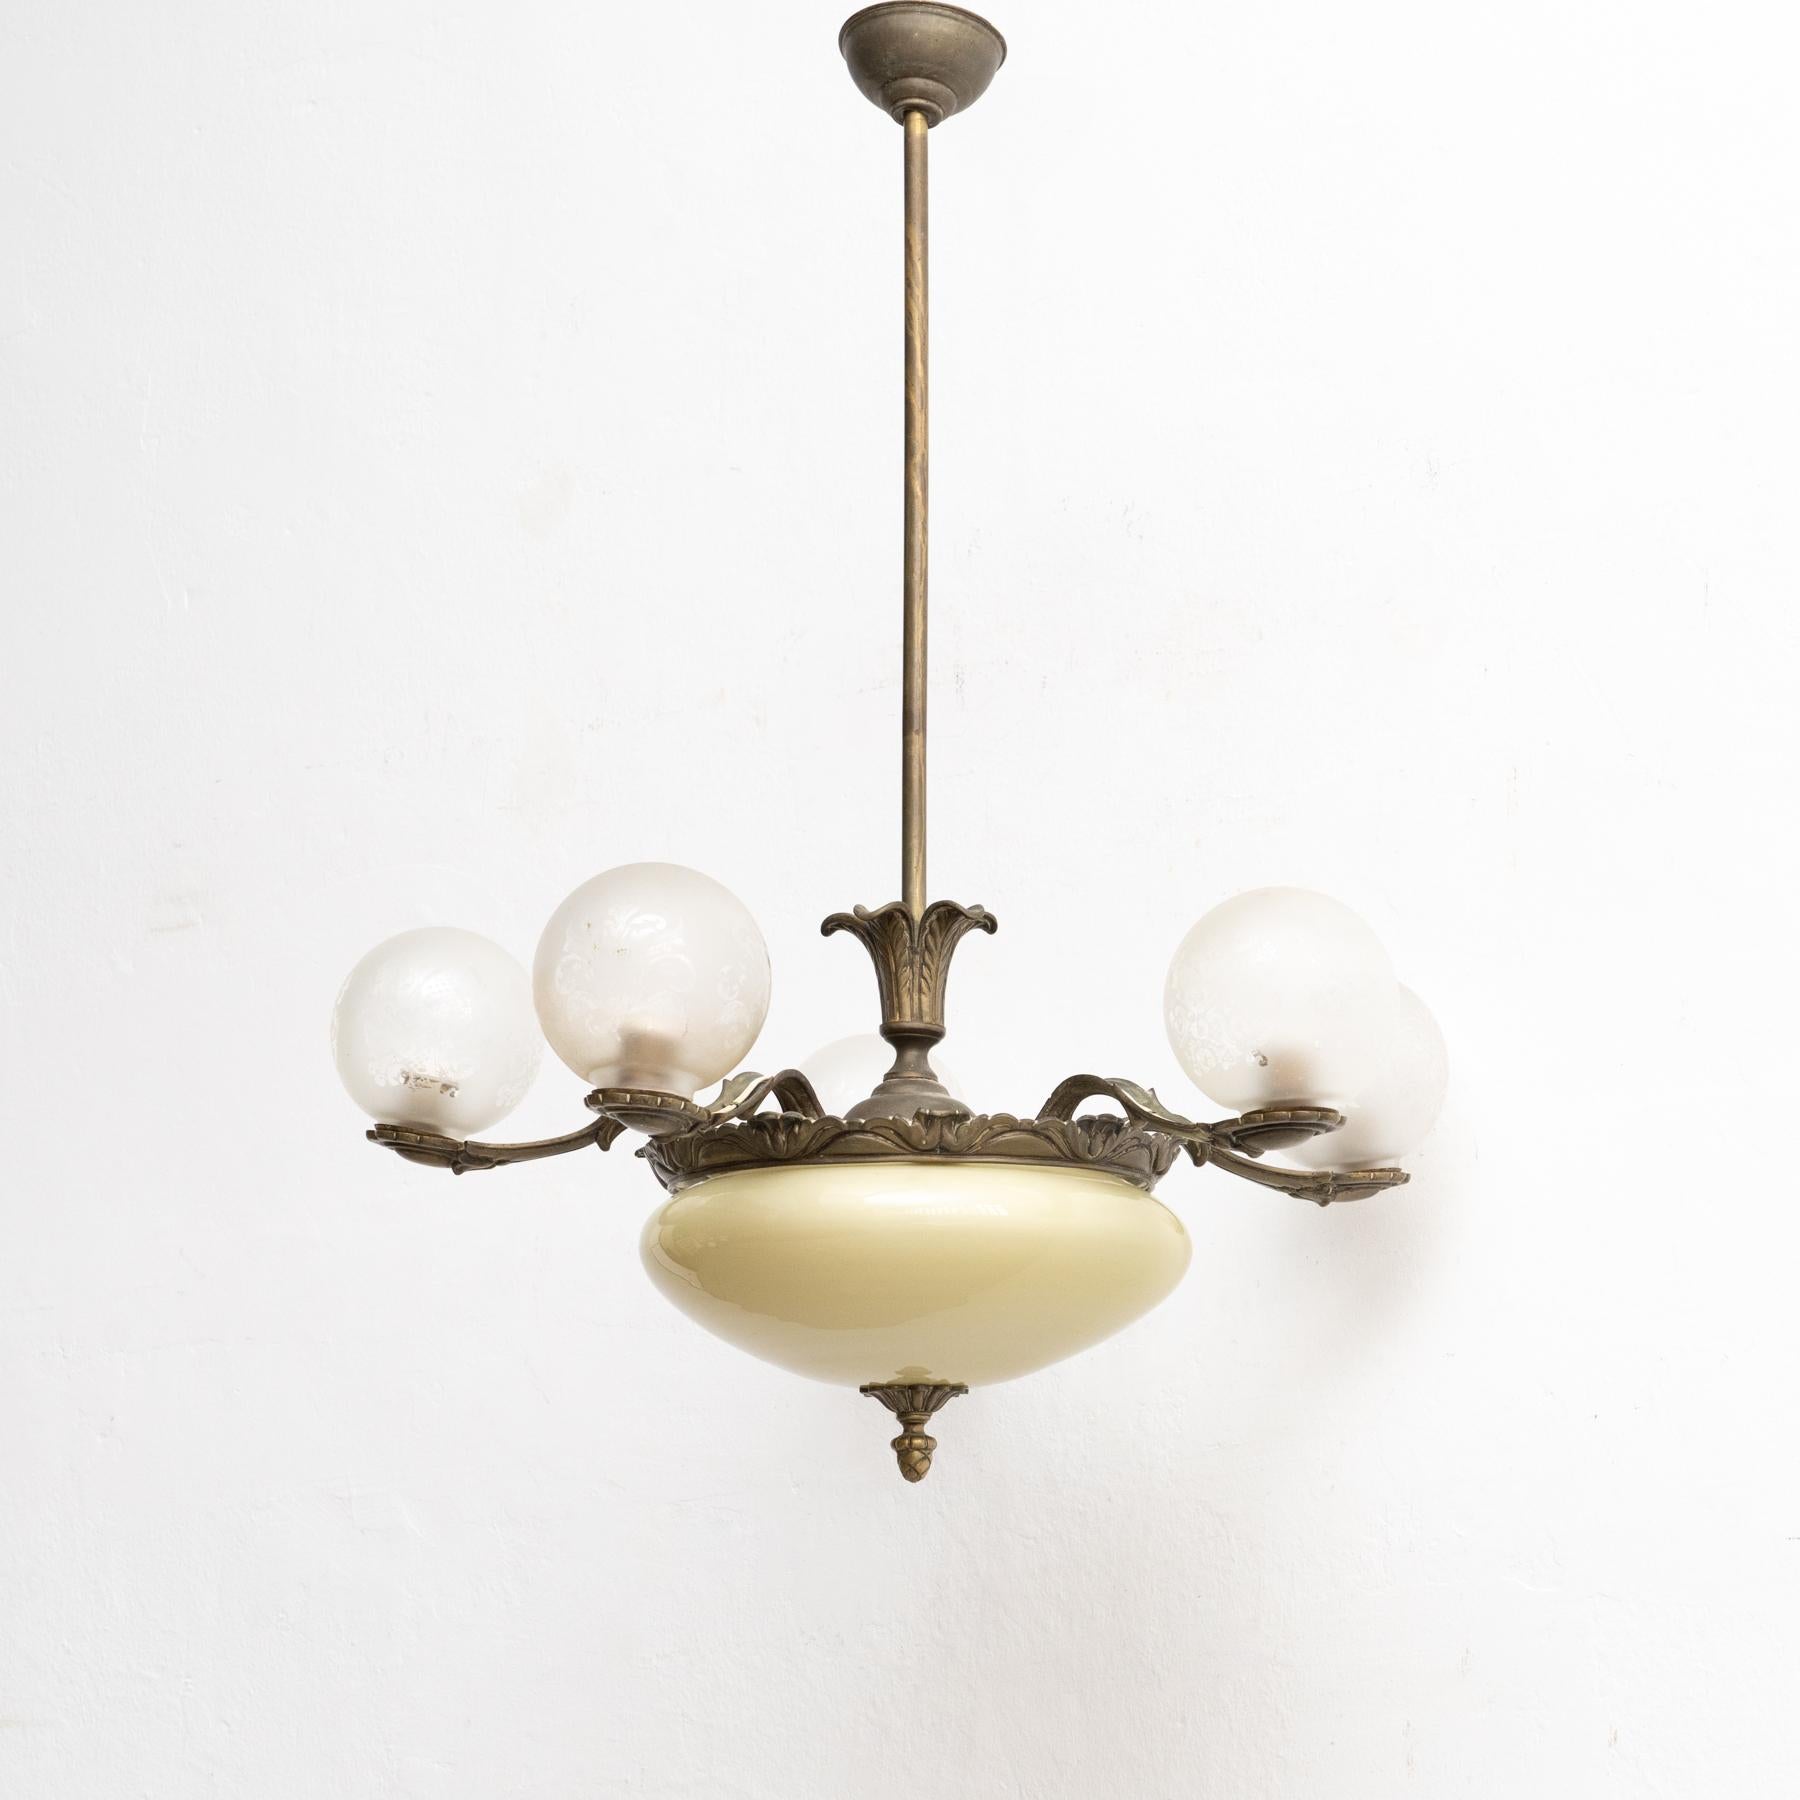 Art Deco Vintage French Metal and Glass Ceiling Lamp circa 1940